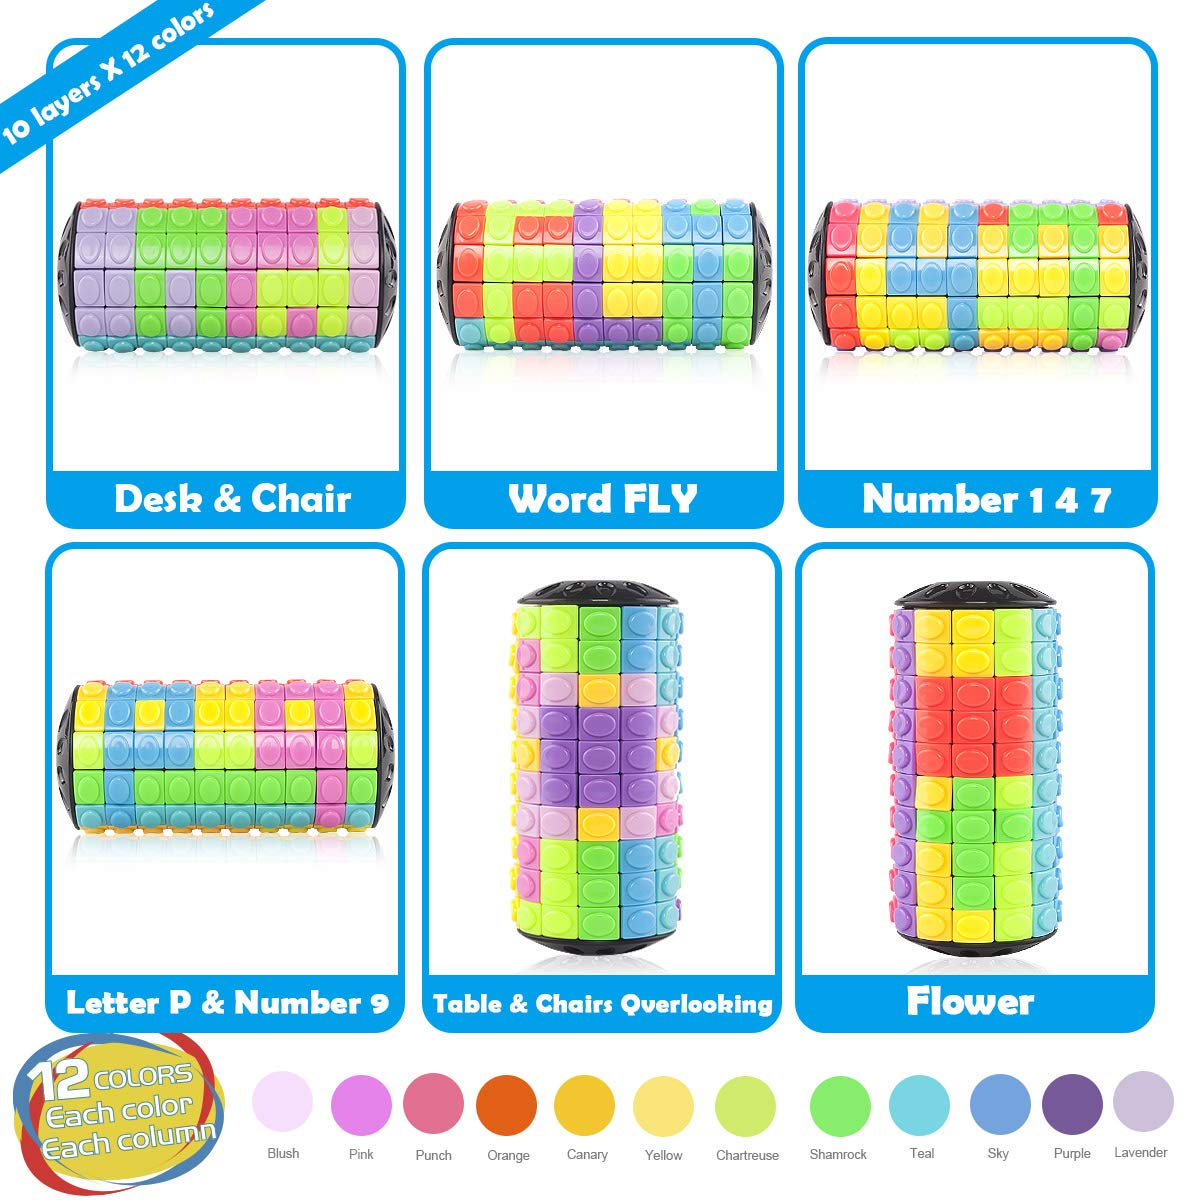 R.Y.TOYS Fidget Toys for Adults/Teens/Boys/Girls,Rotate & Slide Puzzle,Brain Teaser,Cylinder Magic Cube Gift,Birthday Present(12 Colors x 10 Layers) Upgrade